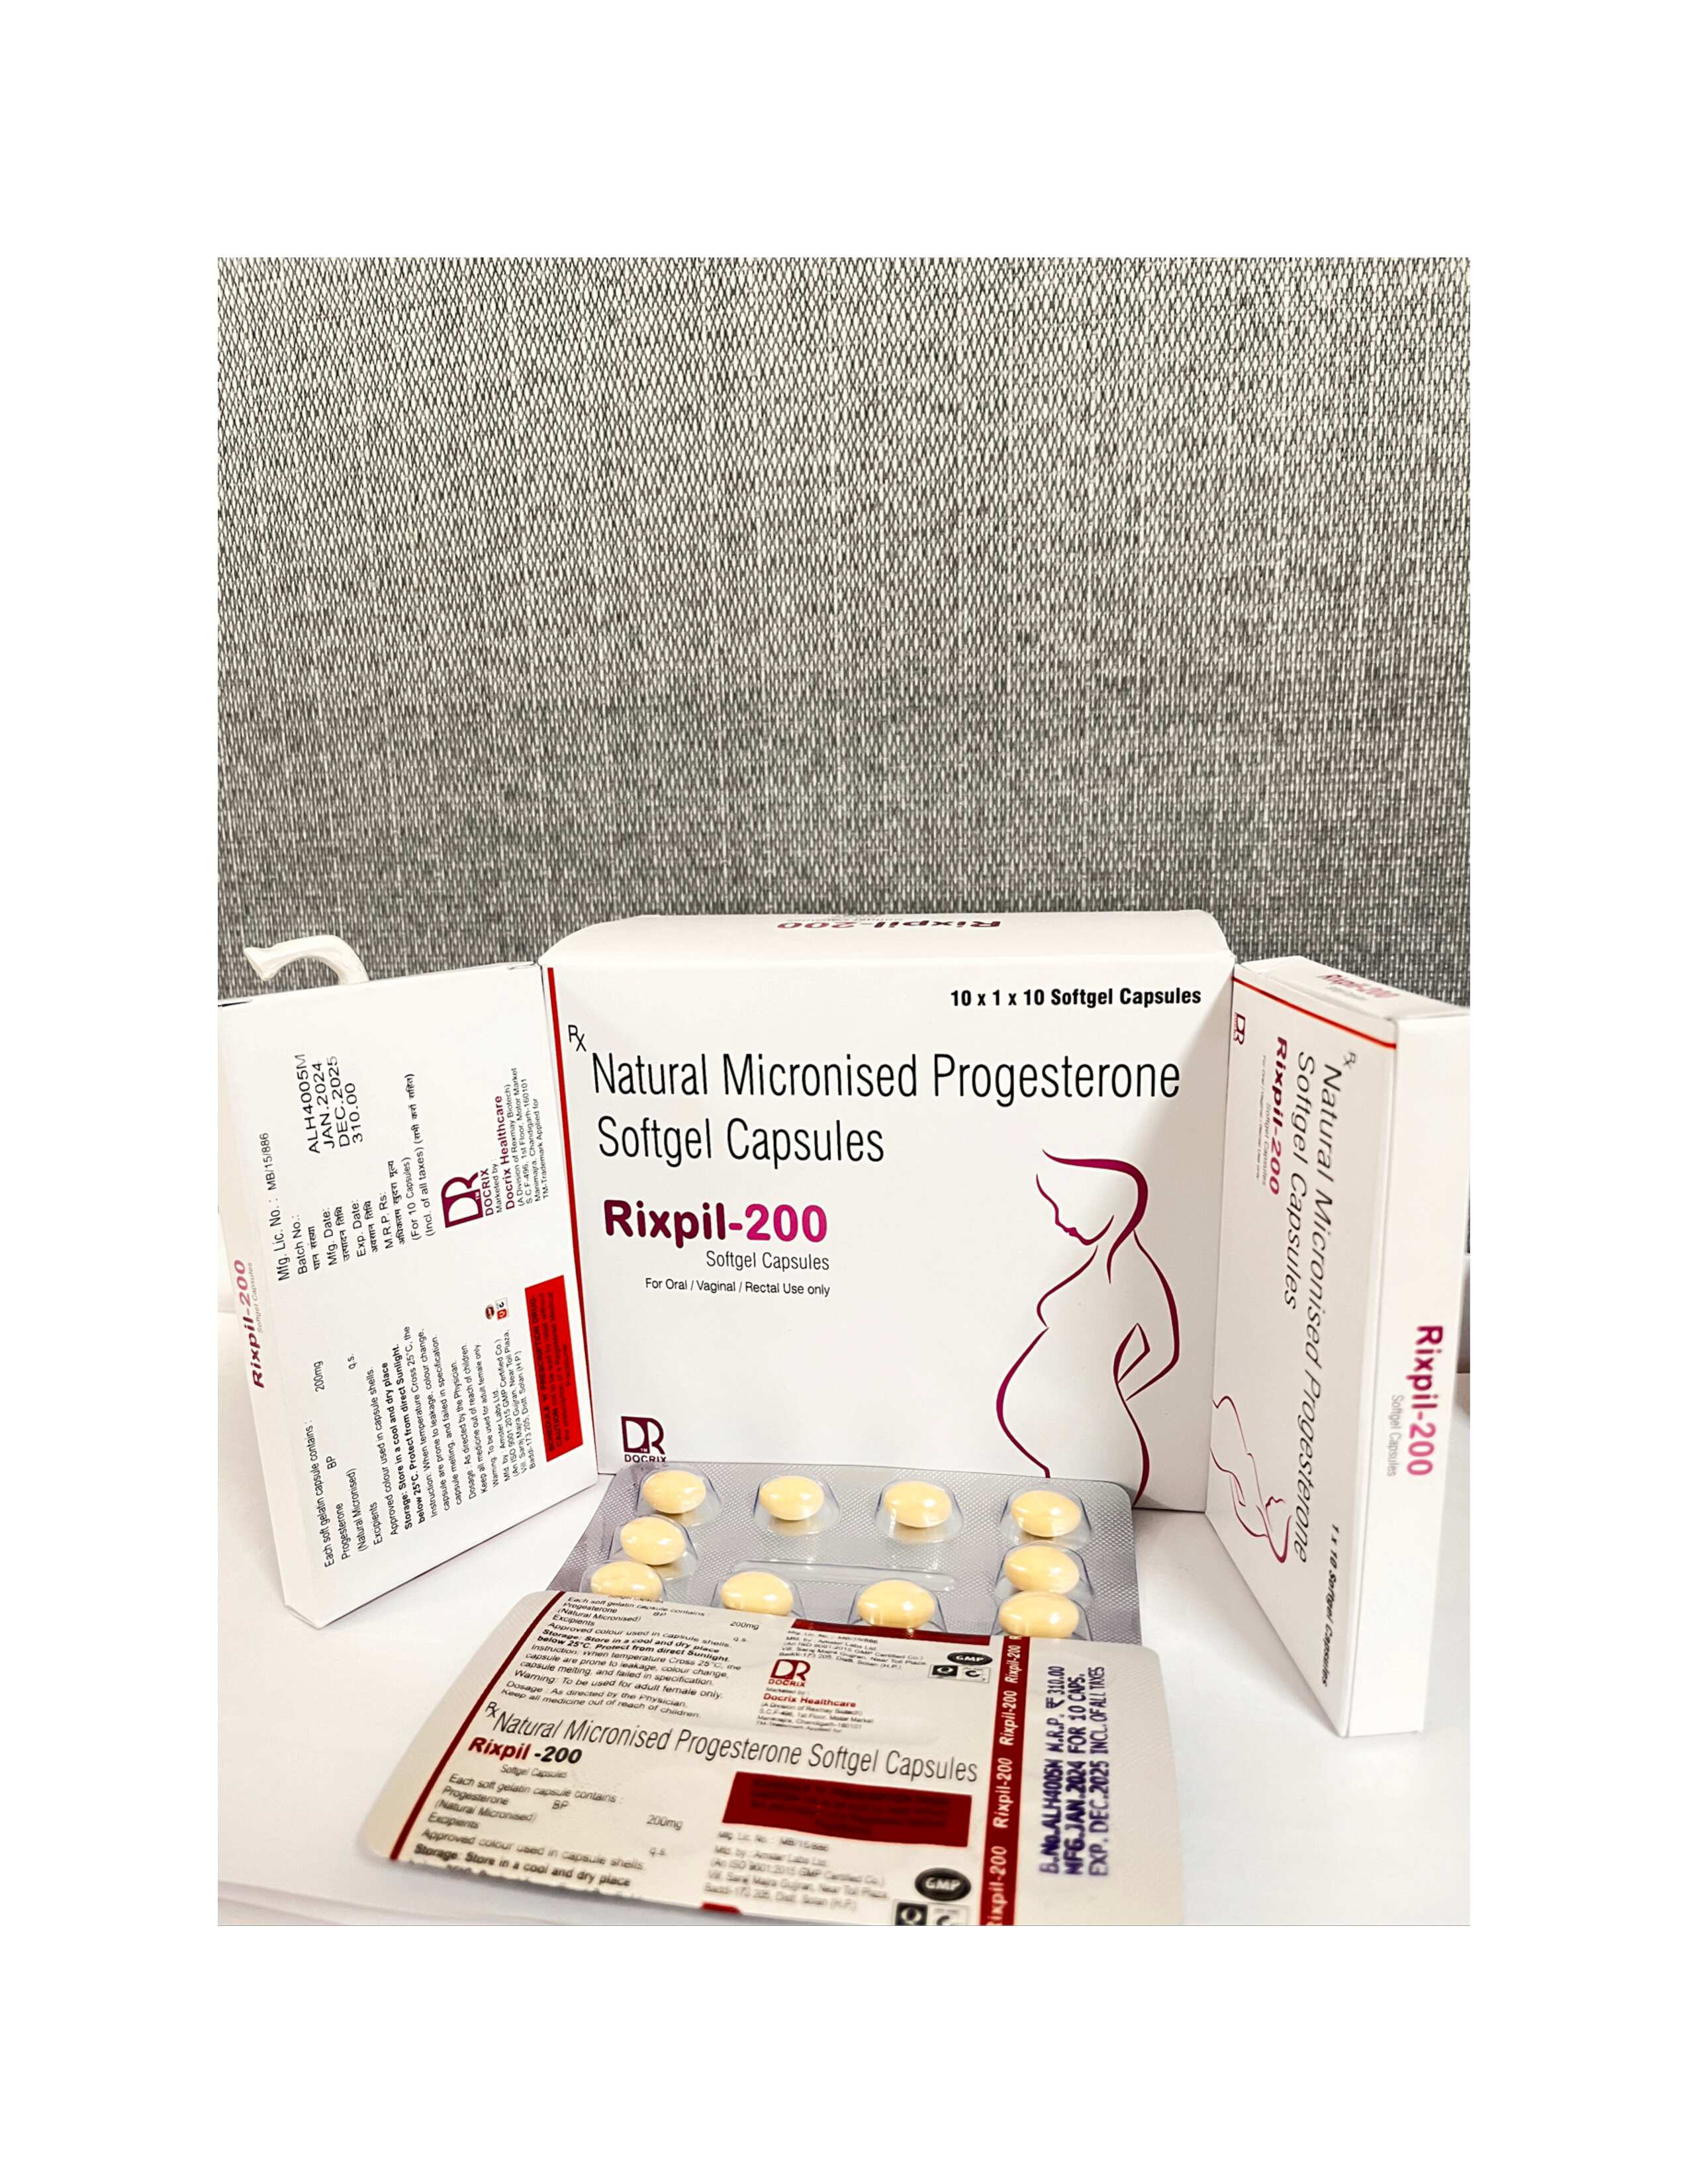 Product Name: Rixpil 200, Compositions of Rixpil 200 are Natural Micronised Progesterone Softgel Capsules - Docrix Healthcare